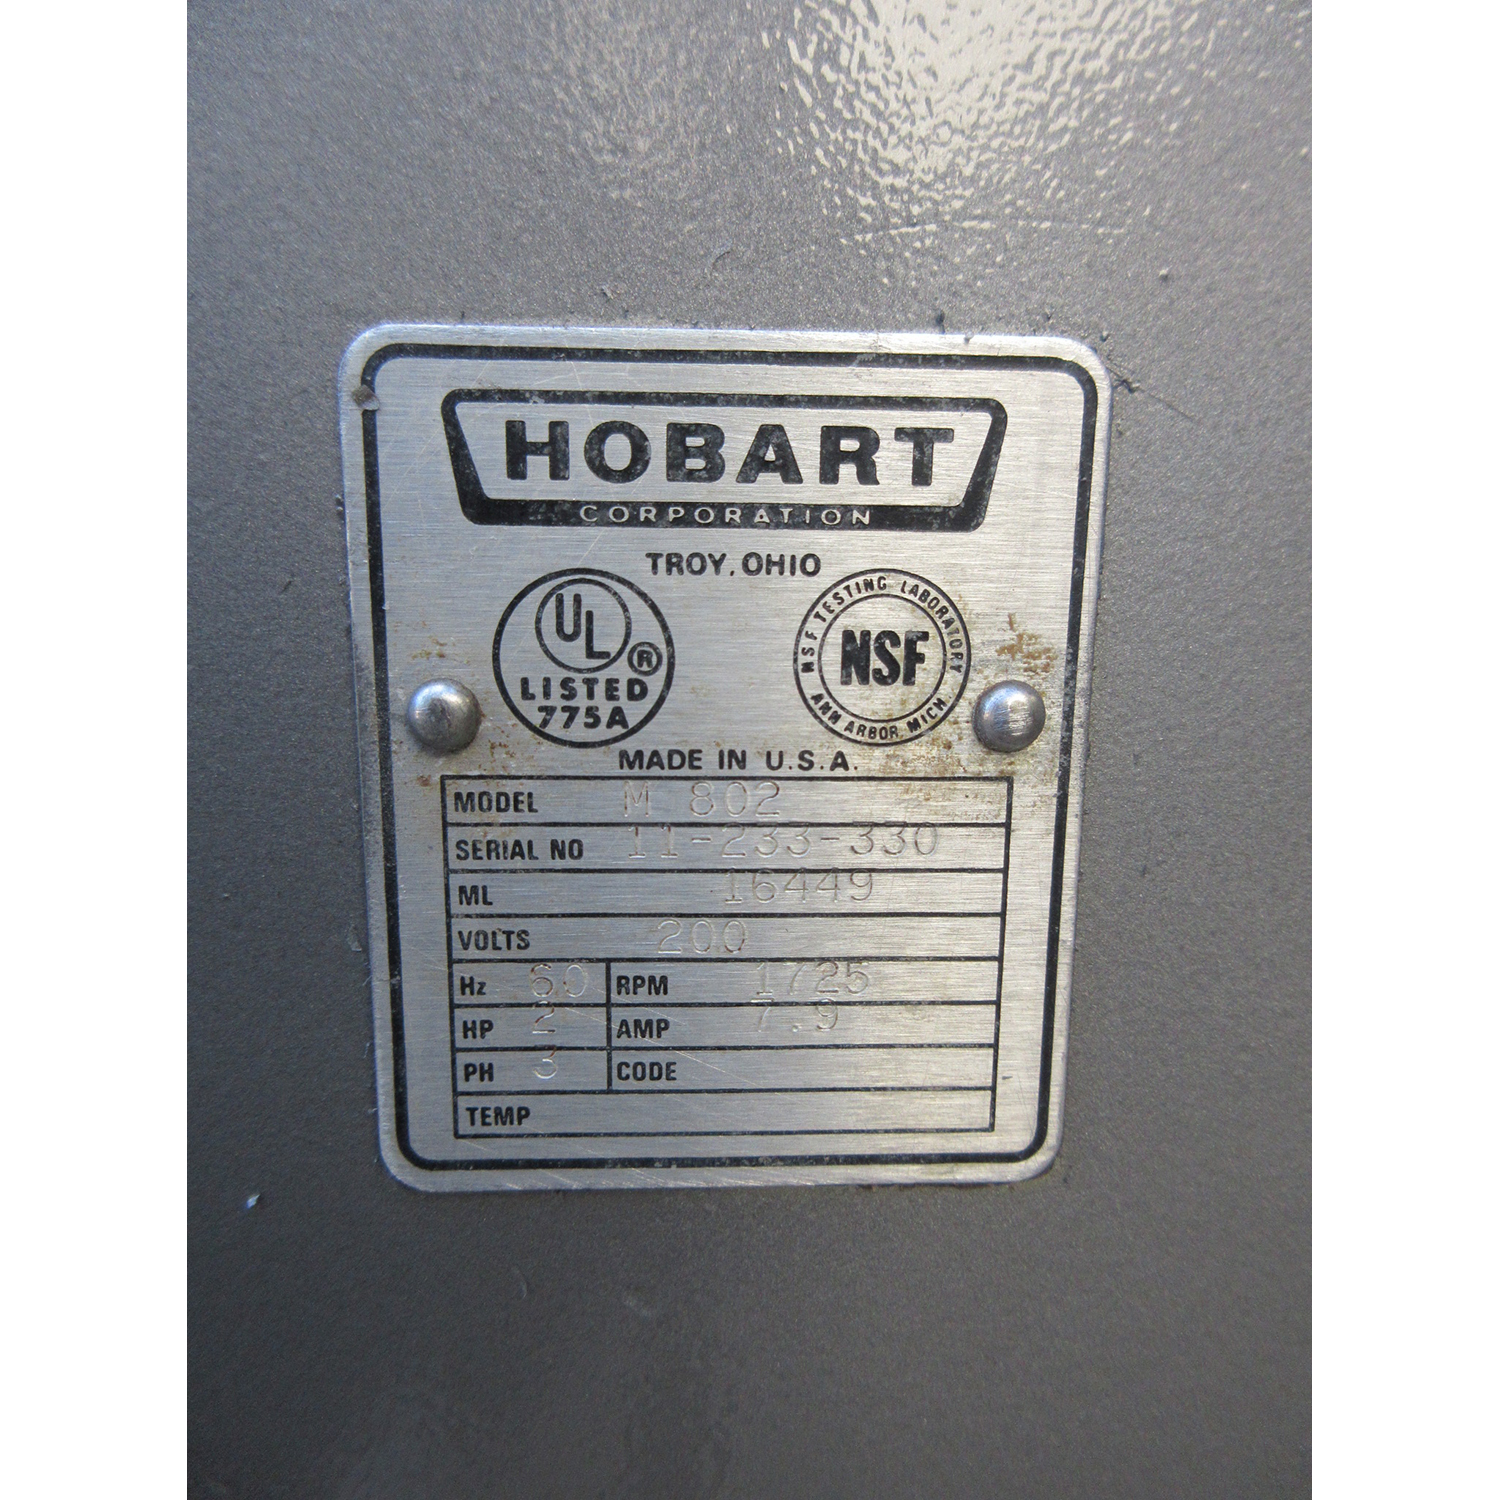 Hobart M802 Mixer 80 Qt, Used Excellent Condition image 3